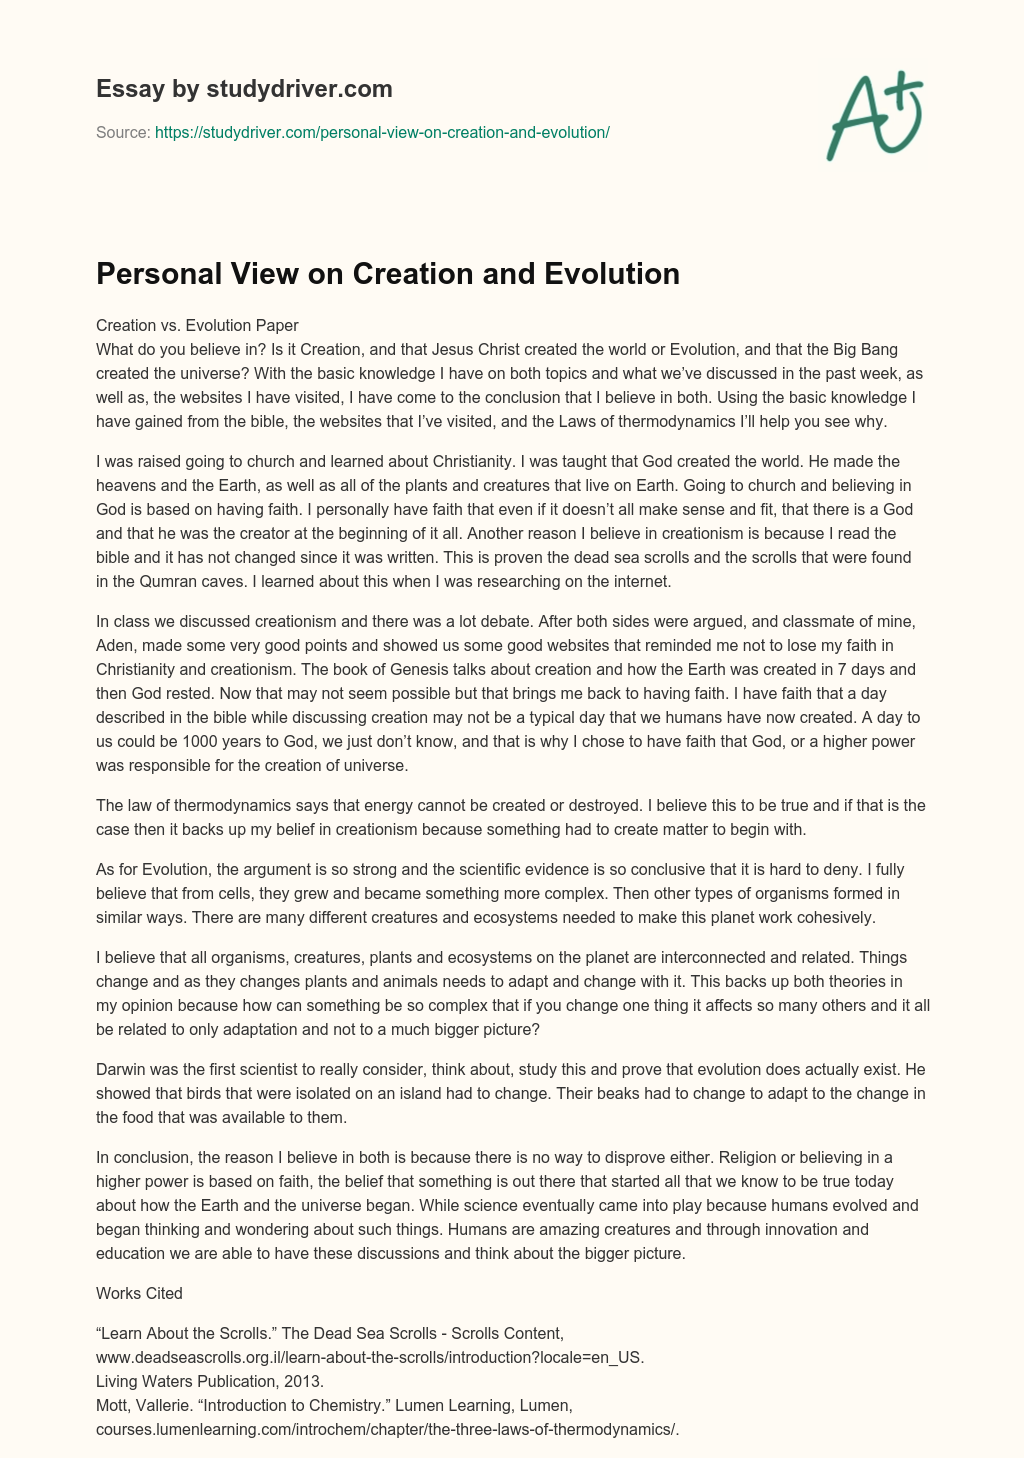 Personal View on Creation and Evolution essay